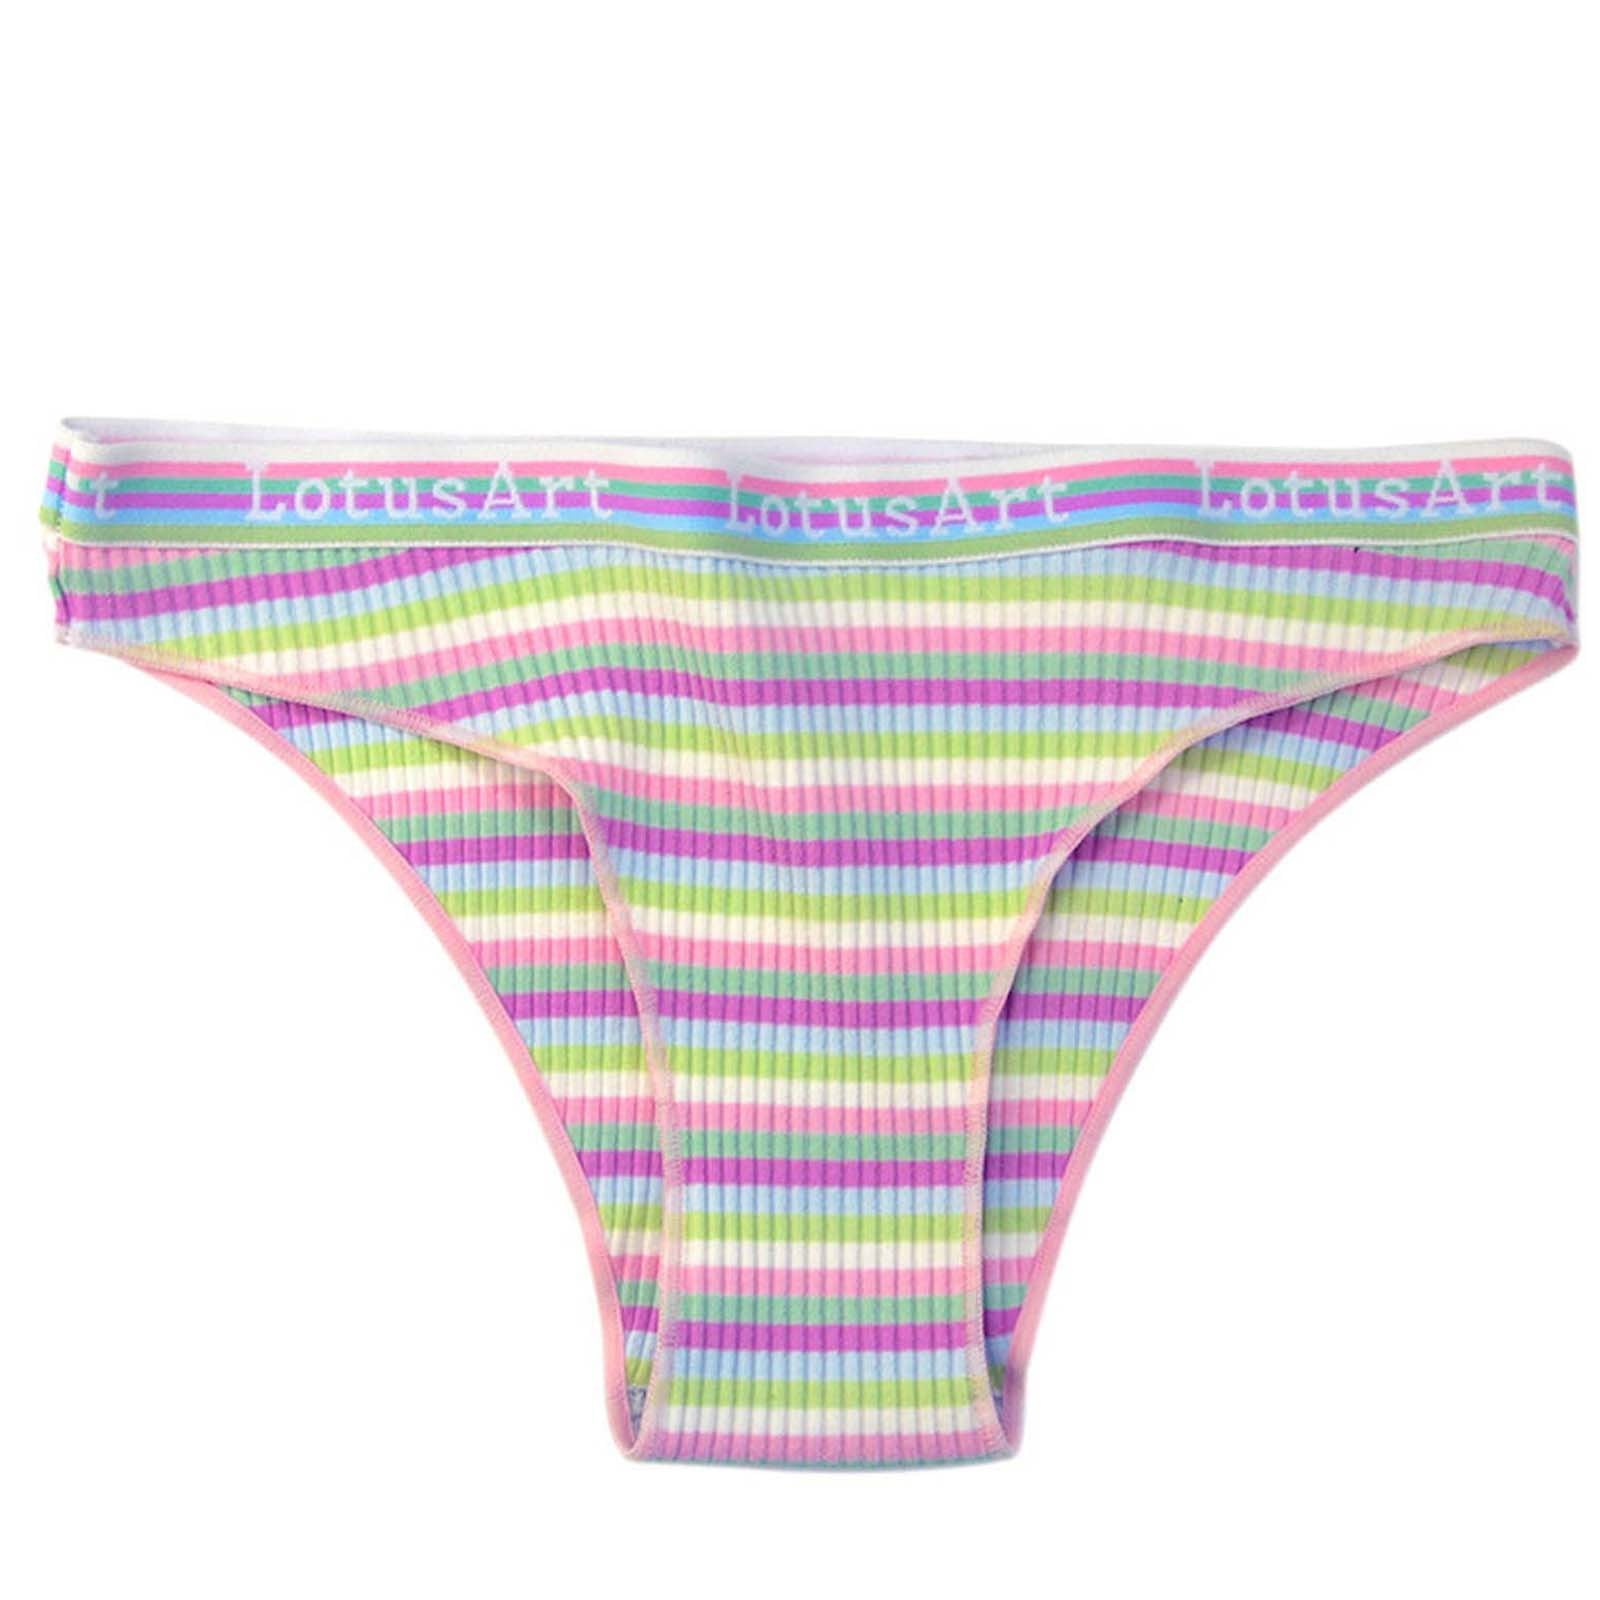 Buankoxy Women's Invisible Seamless Hipster Panties Mid-Rise No